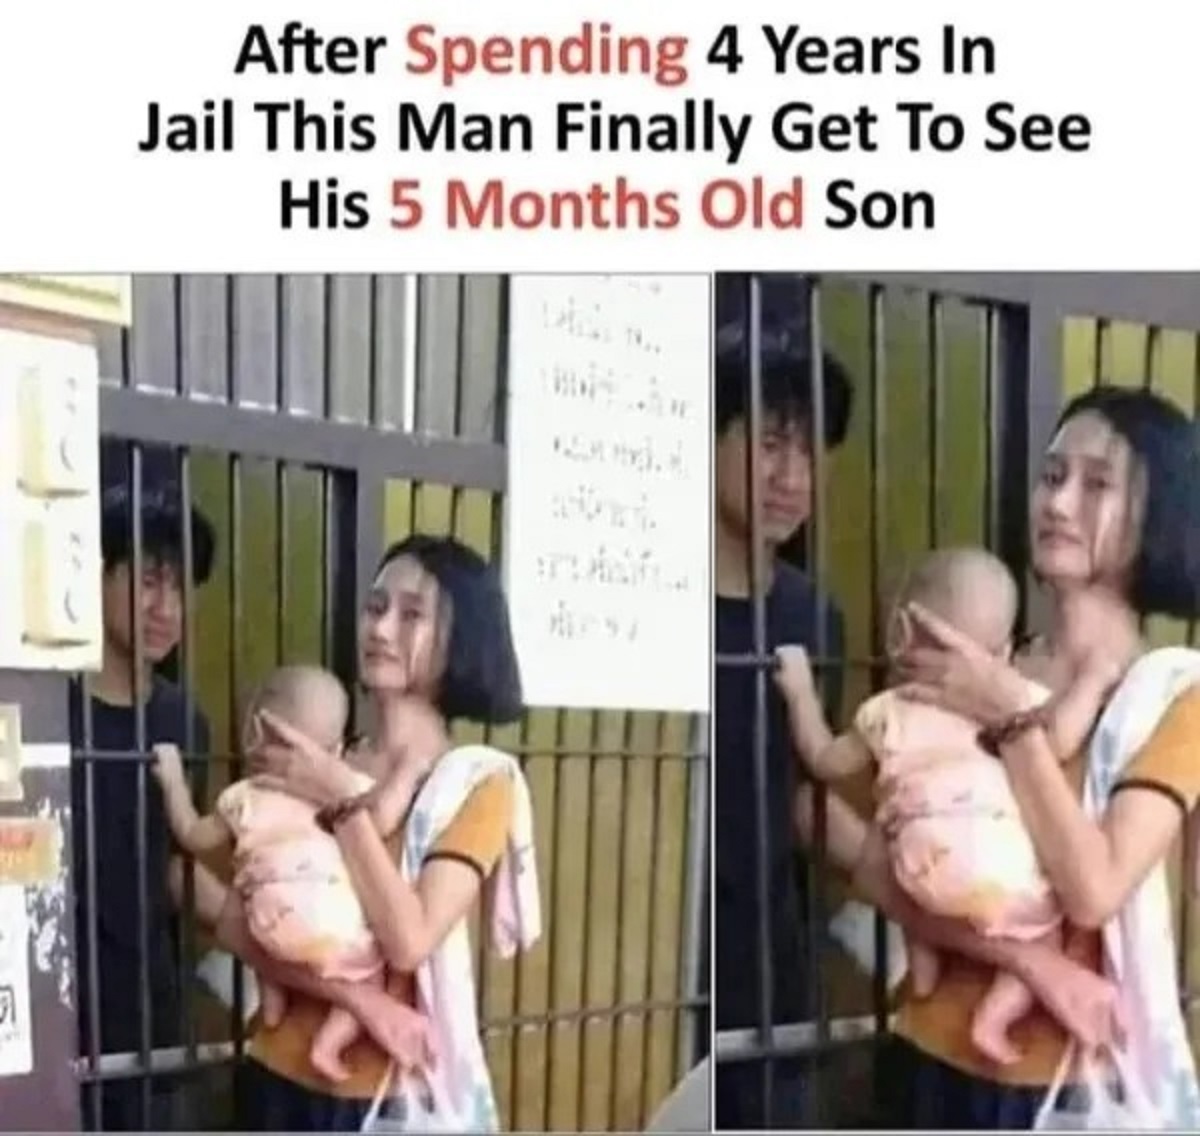 conjugal visit meme - 51 After Spending 4 Years In Jail This Man Finally Get To See His 5 Months Old Son